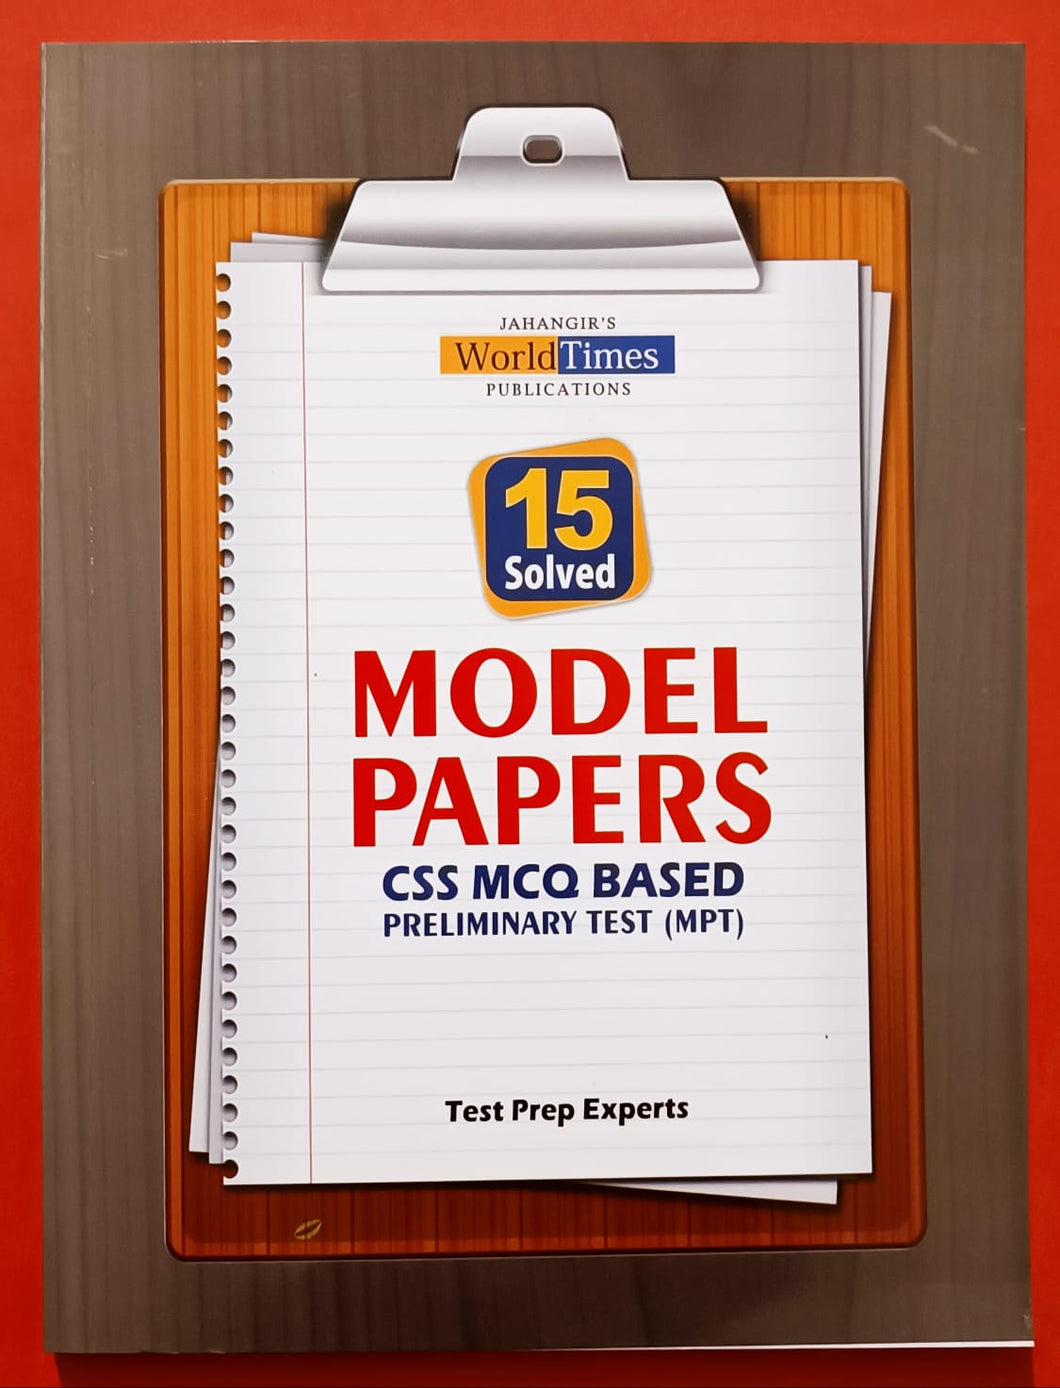 15 Solved Model Papers
(CSS MCQ BASED Preliminary Test MPT)